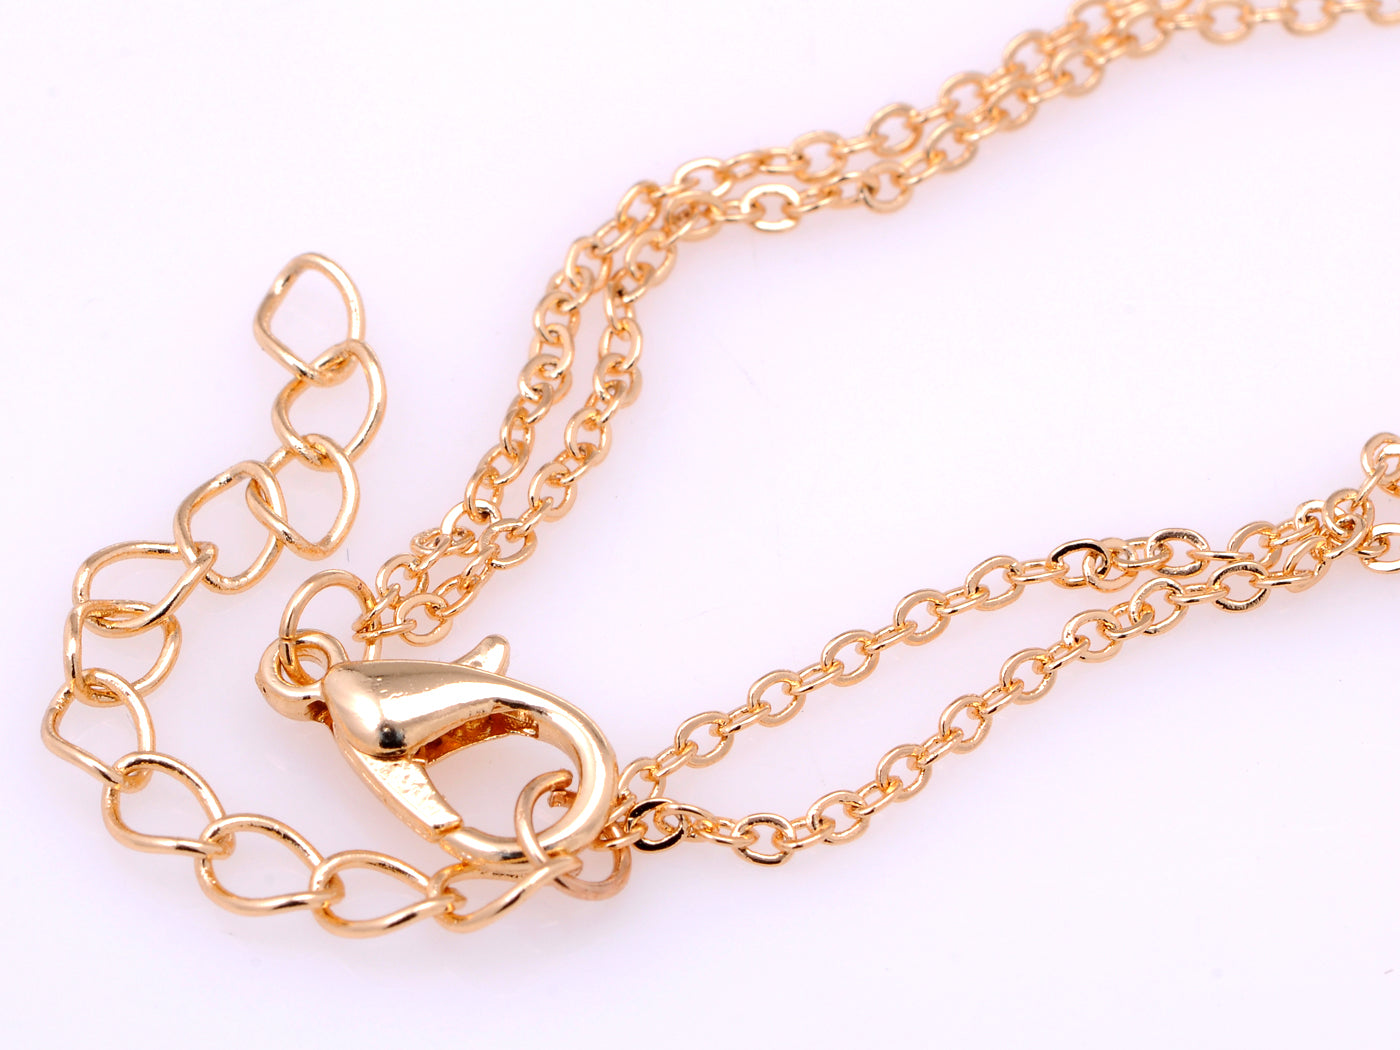 D Chain Link Style Necklace With Double Chains And Locking Closure